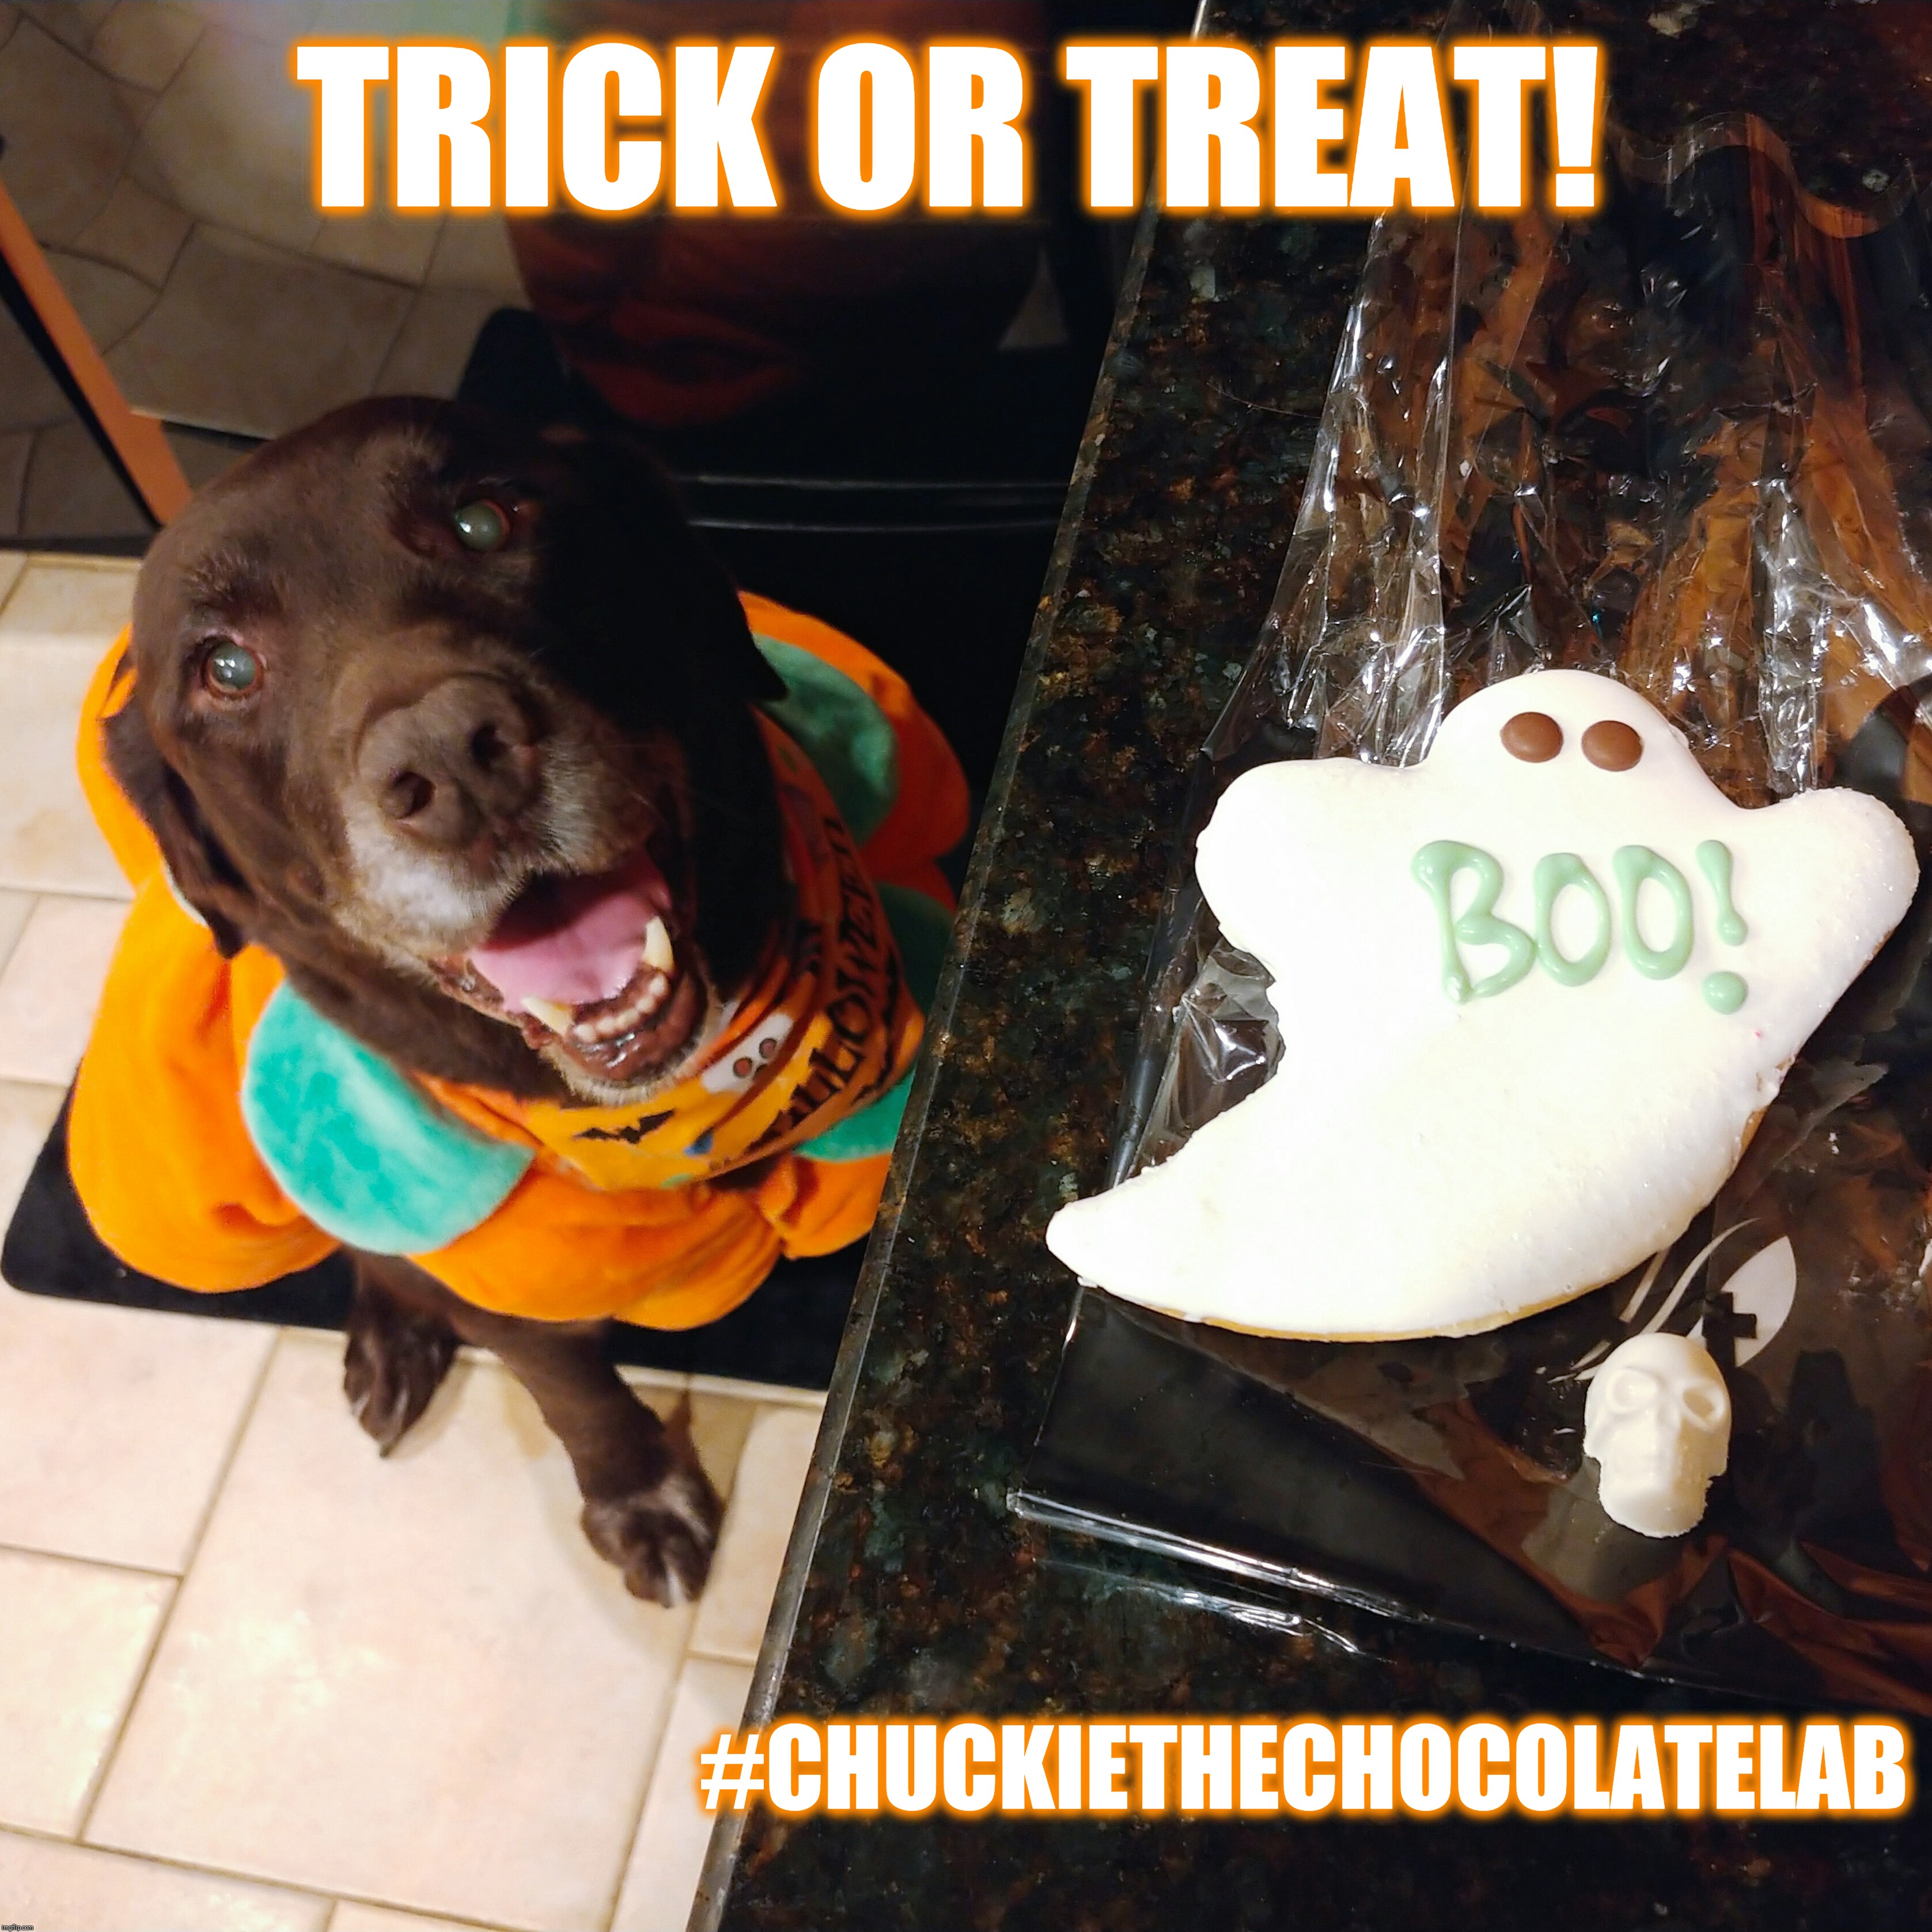 Trick or treat! | TRICK OR TREAT! #CHUCKIETHECHOCOLATELAB | image tagged in chuckie the chocolate lab,trick or treat,halloween,dogs,memes,cute | made w/ Imgflip meme maker